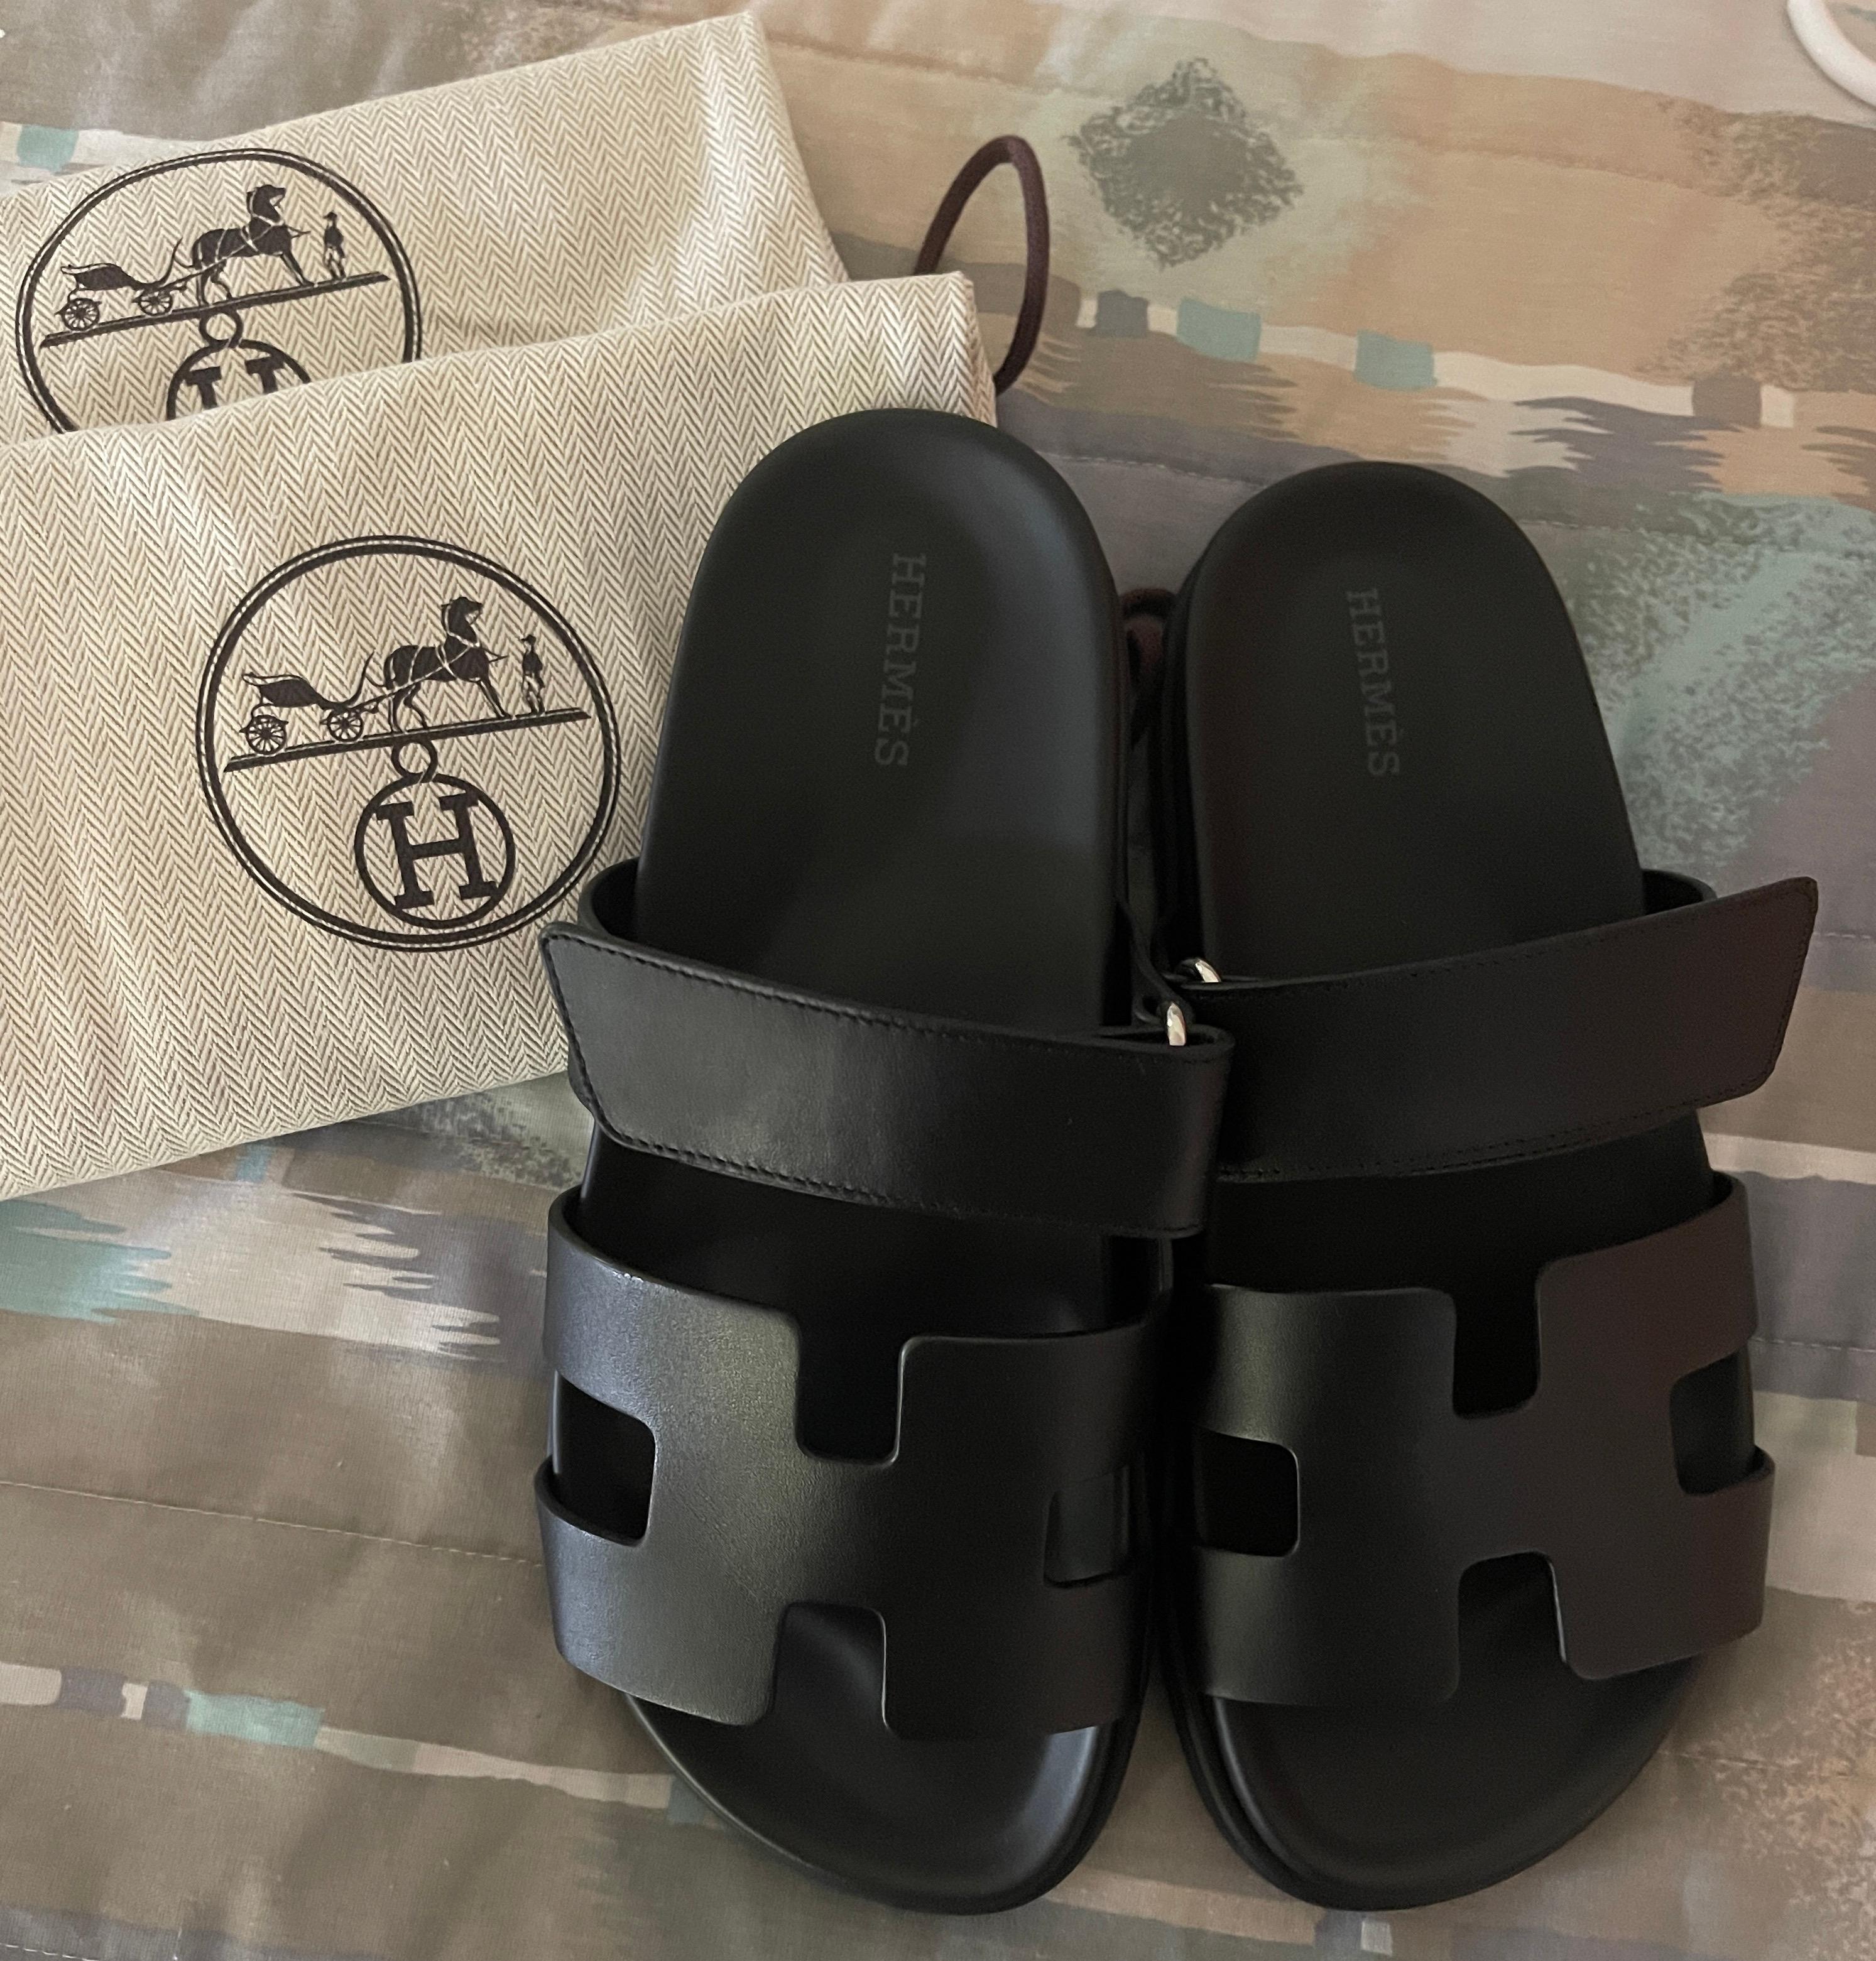 Hermes Chypre Sandal
Techno-sandal in calfskin with anatomical rubber sole and adjustable strap.
A sleek design for a comfortable casual look.

SOLDOUT
We only have this one pair 
No others in stock
39


Made in Italy
Black rubber sole
Black